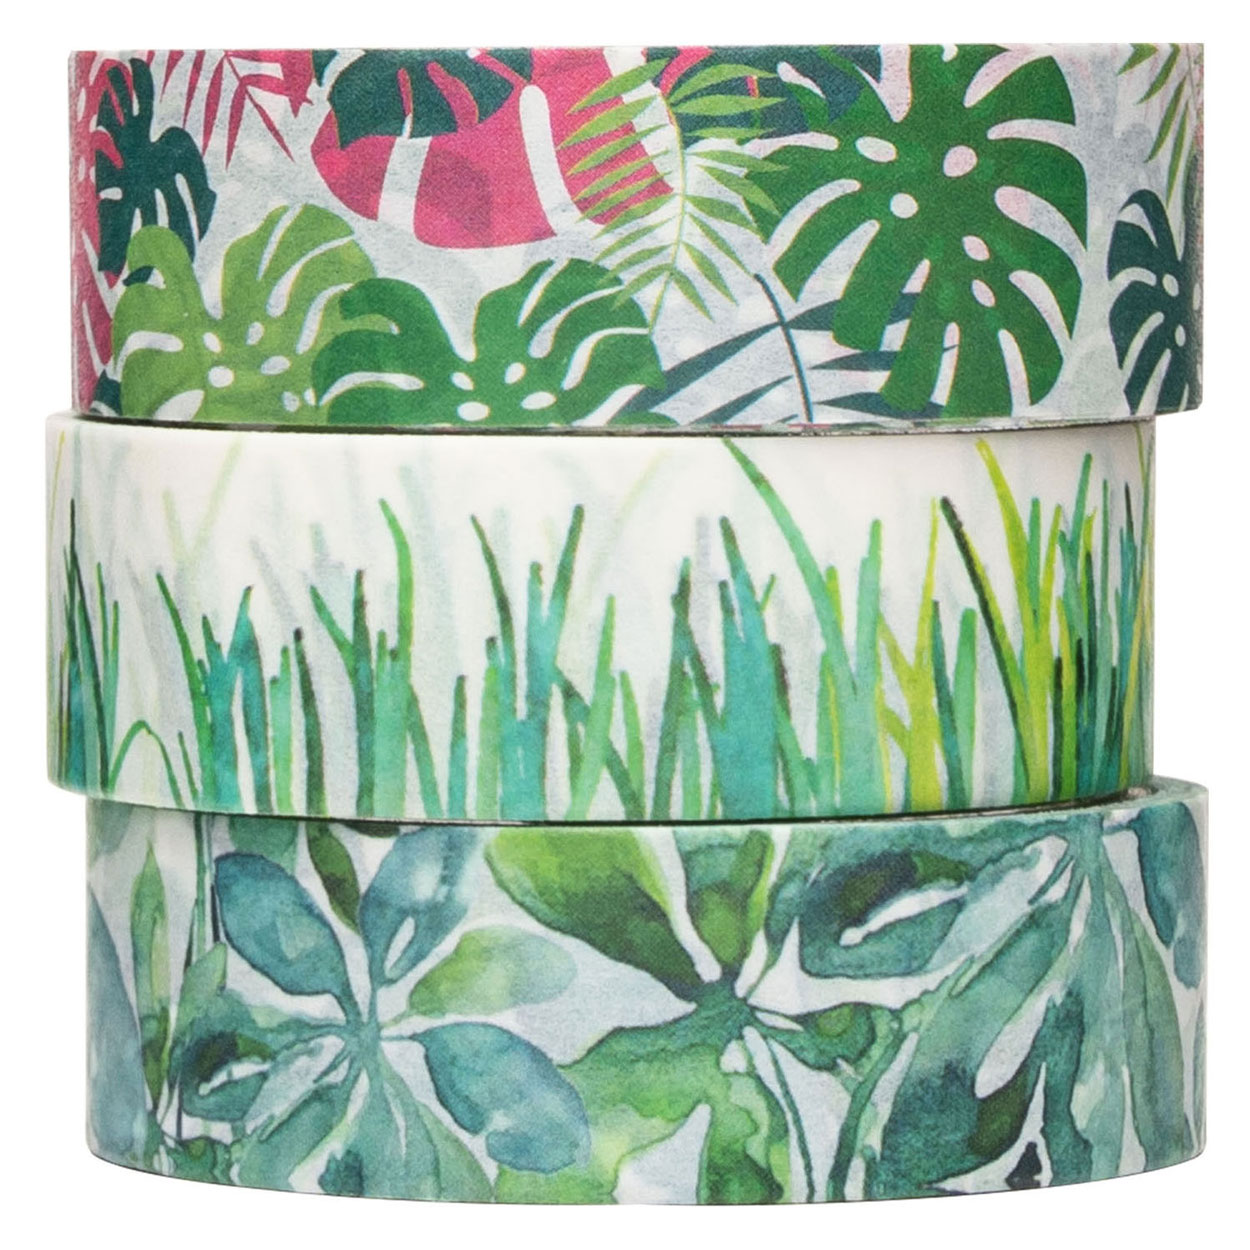 Colorations - Washi Tape Plants 3 Rollen, 5mtr.